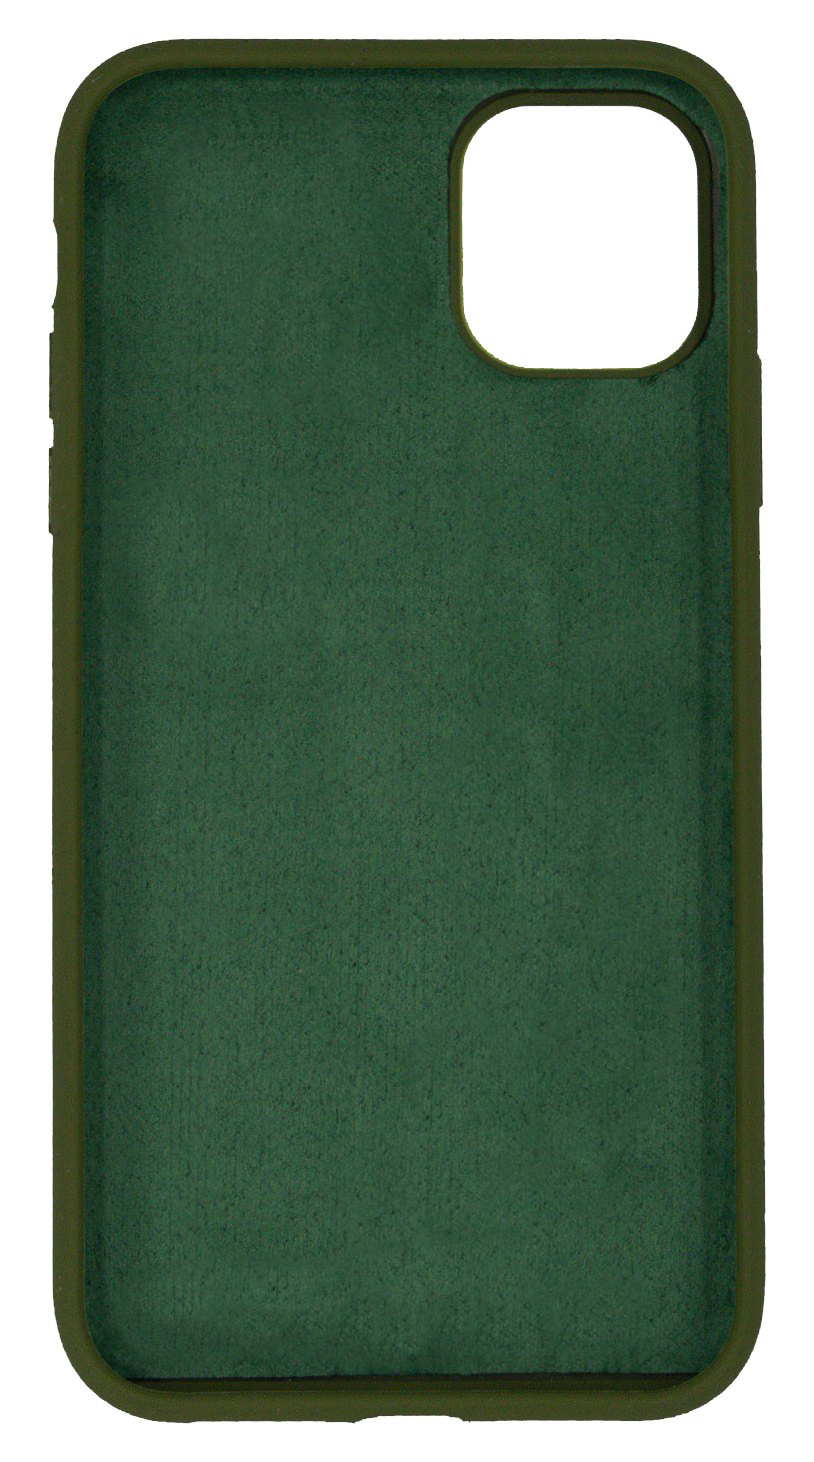 MC-Army Green-MBR-Iphone11 Pro Max | buy mobile cases online | online gift shop